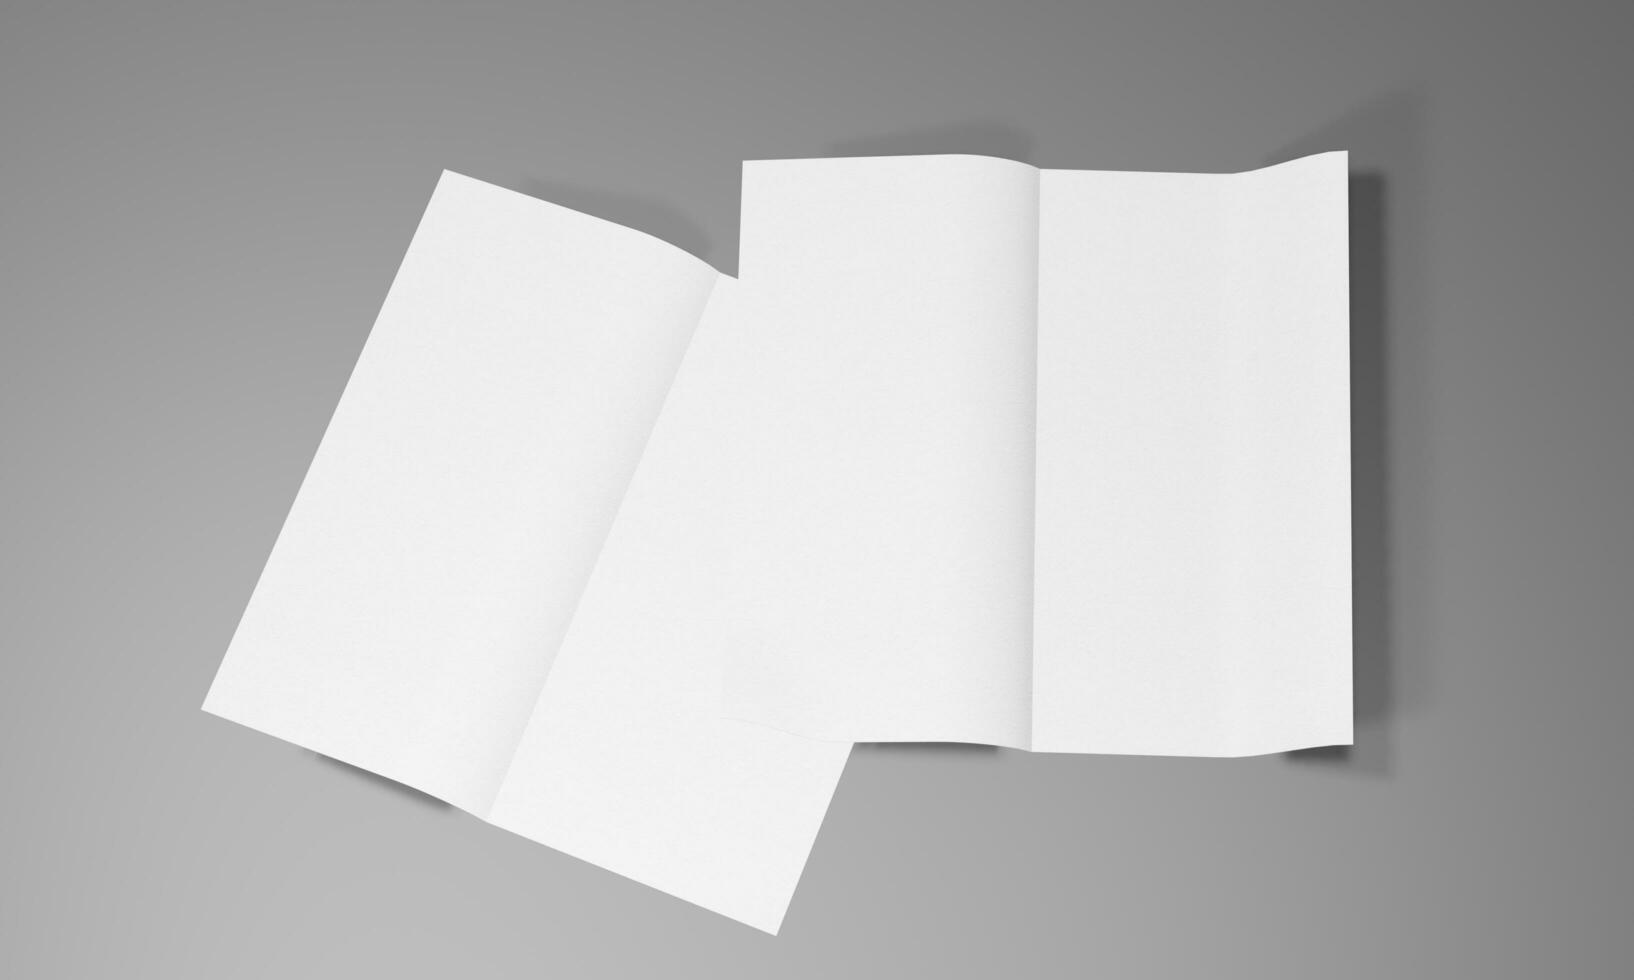 Blank portrait paper mock-up. brochure magazine, white changeable background paper isolated on gray good for your business mockup photo